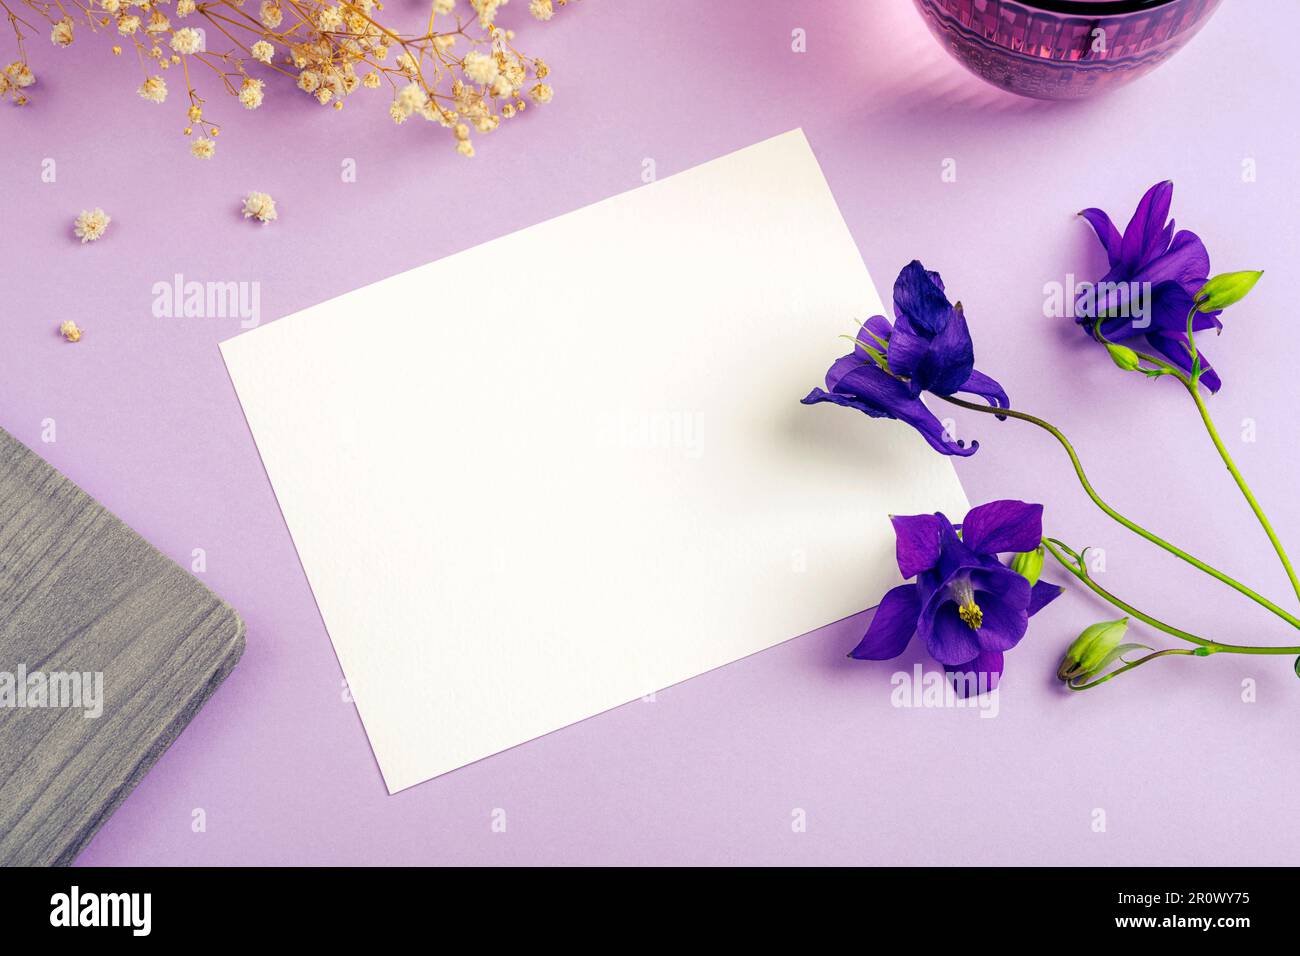 Blank card, notepad, glass of water and blue Aquilegia Alpina flowers on purple table. Top view, flat lay, mockup. Stock Photo